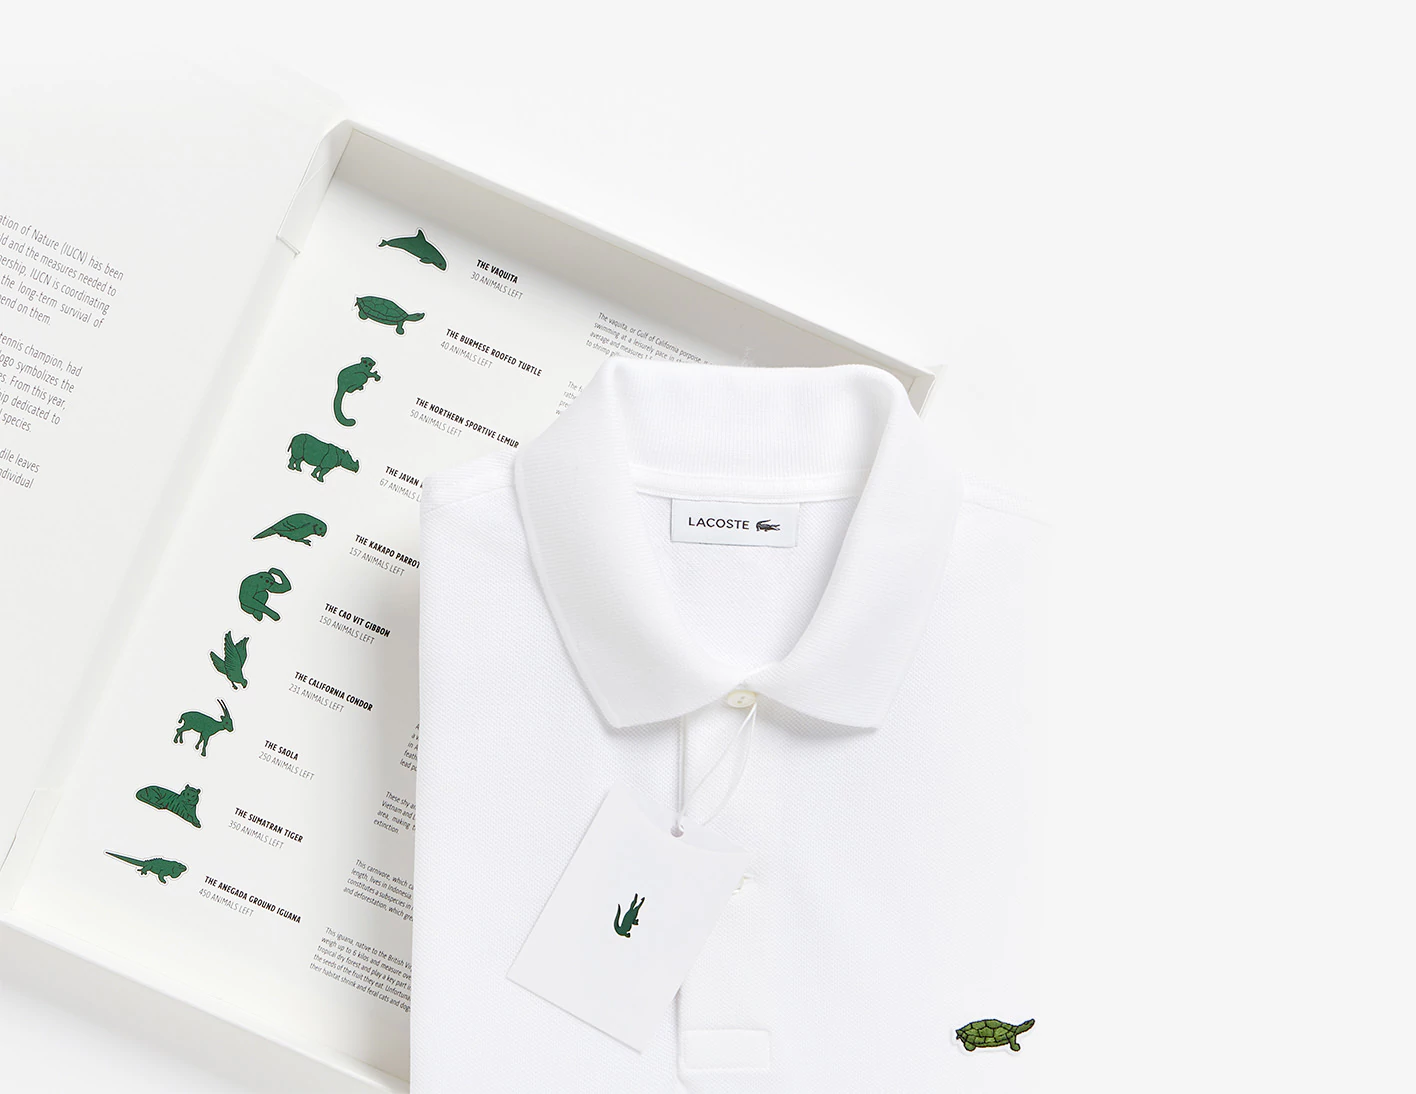 different lacoste logos